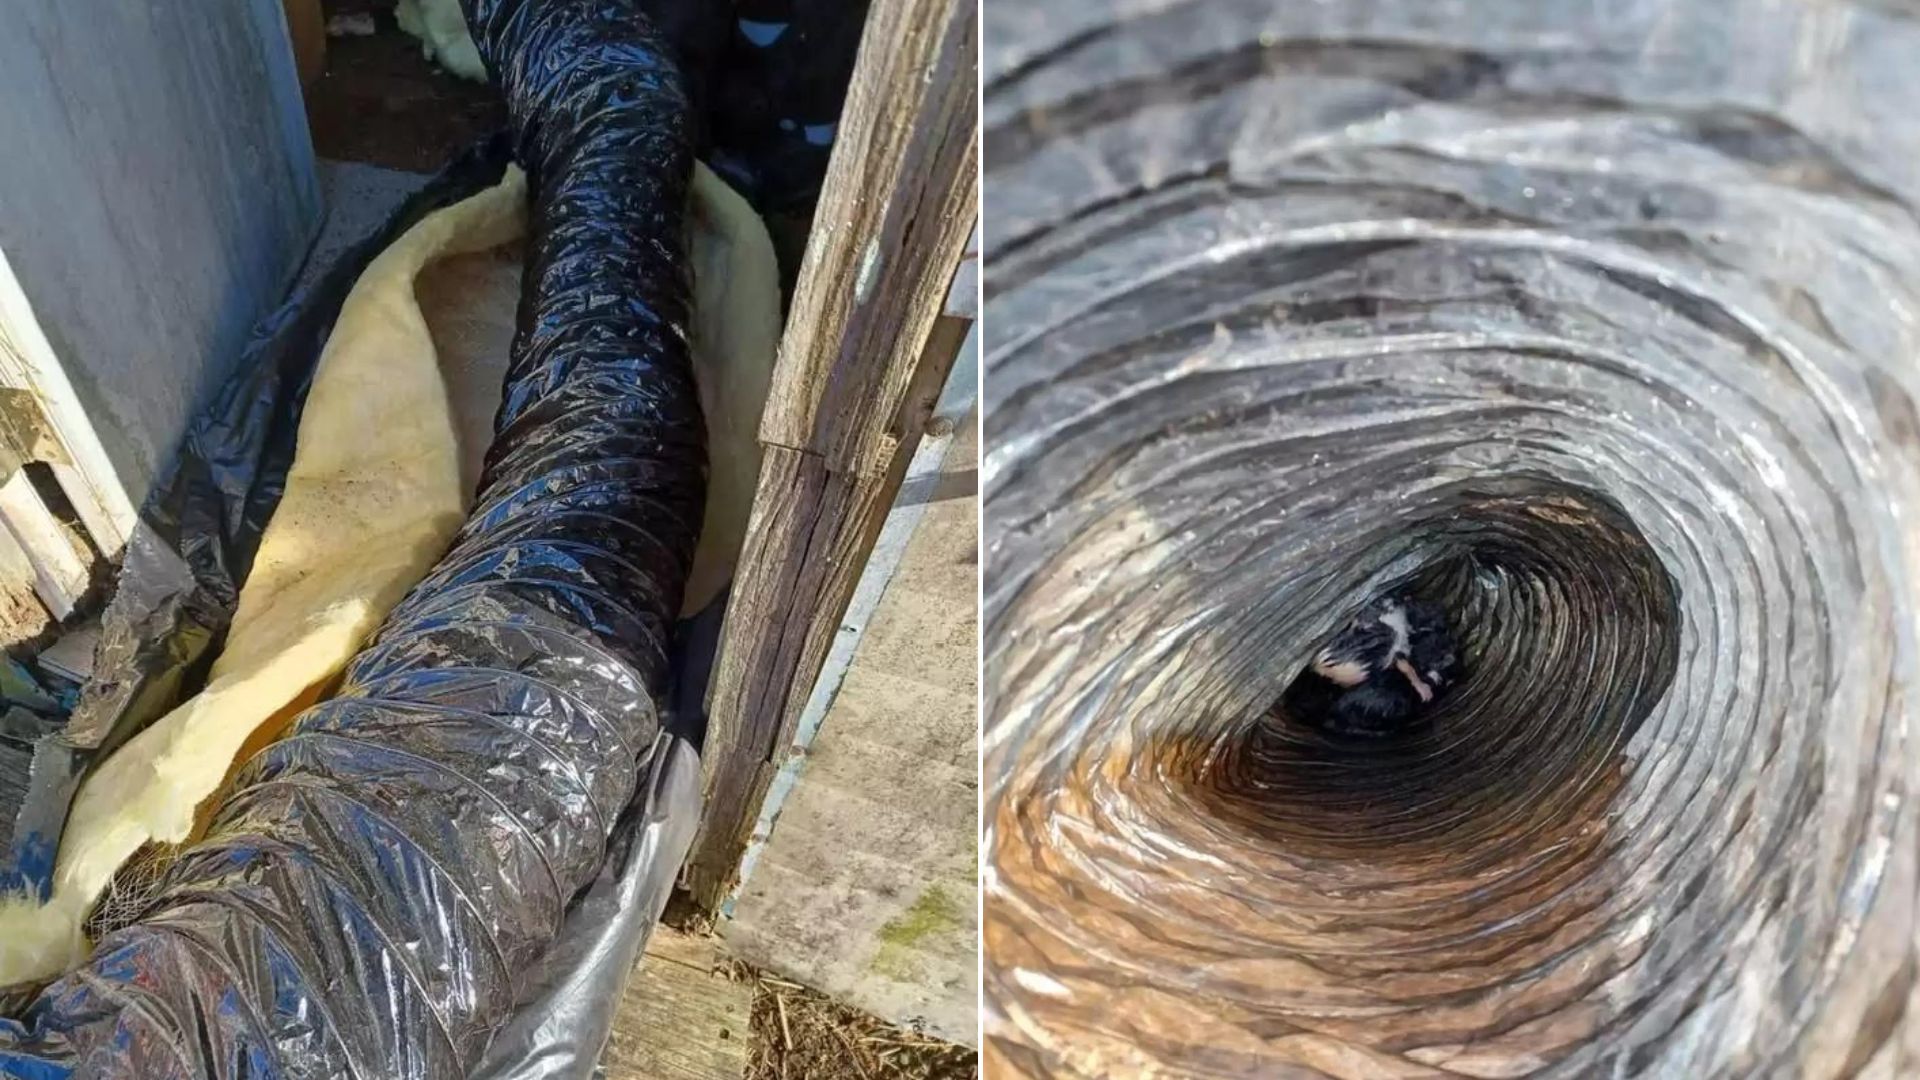 People Find A Shocking Surprise Within The Insulation Tube In An Abandoned Trailer